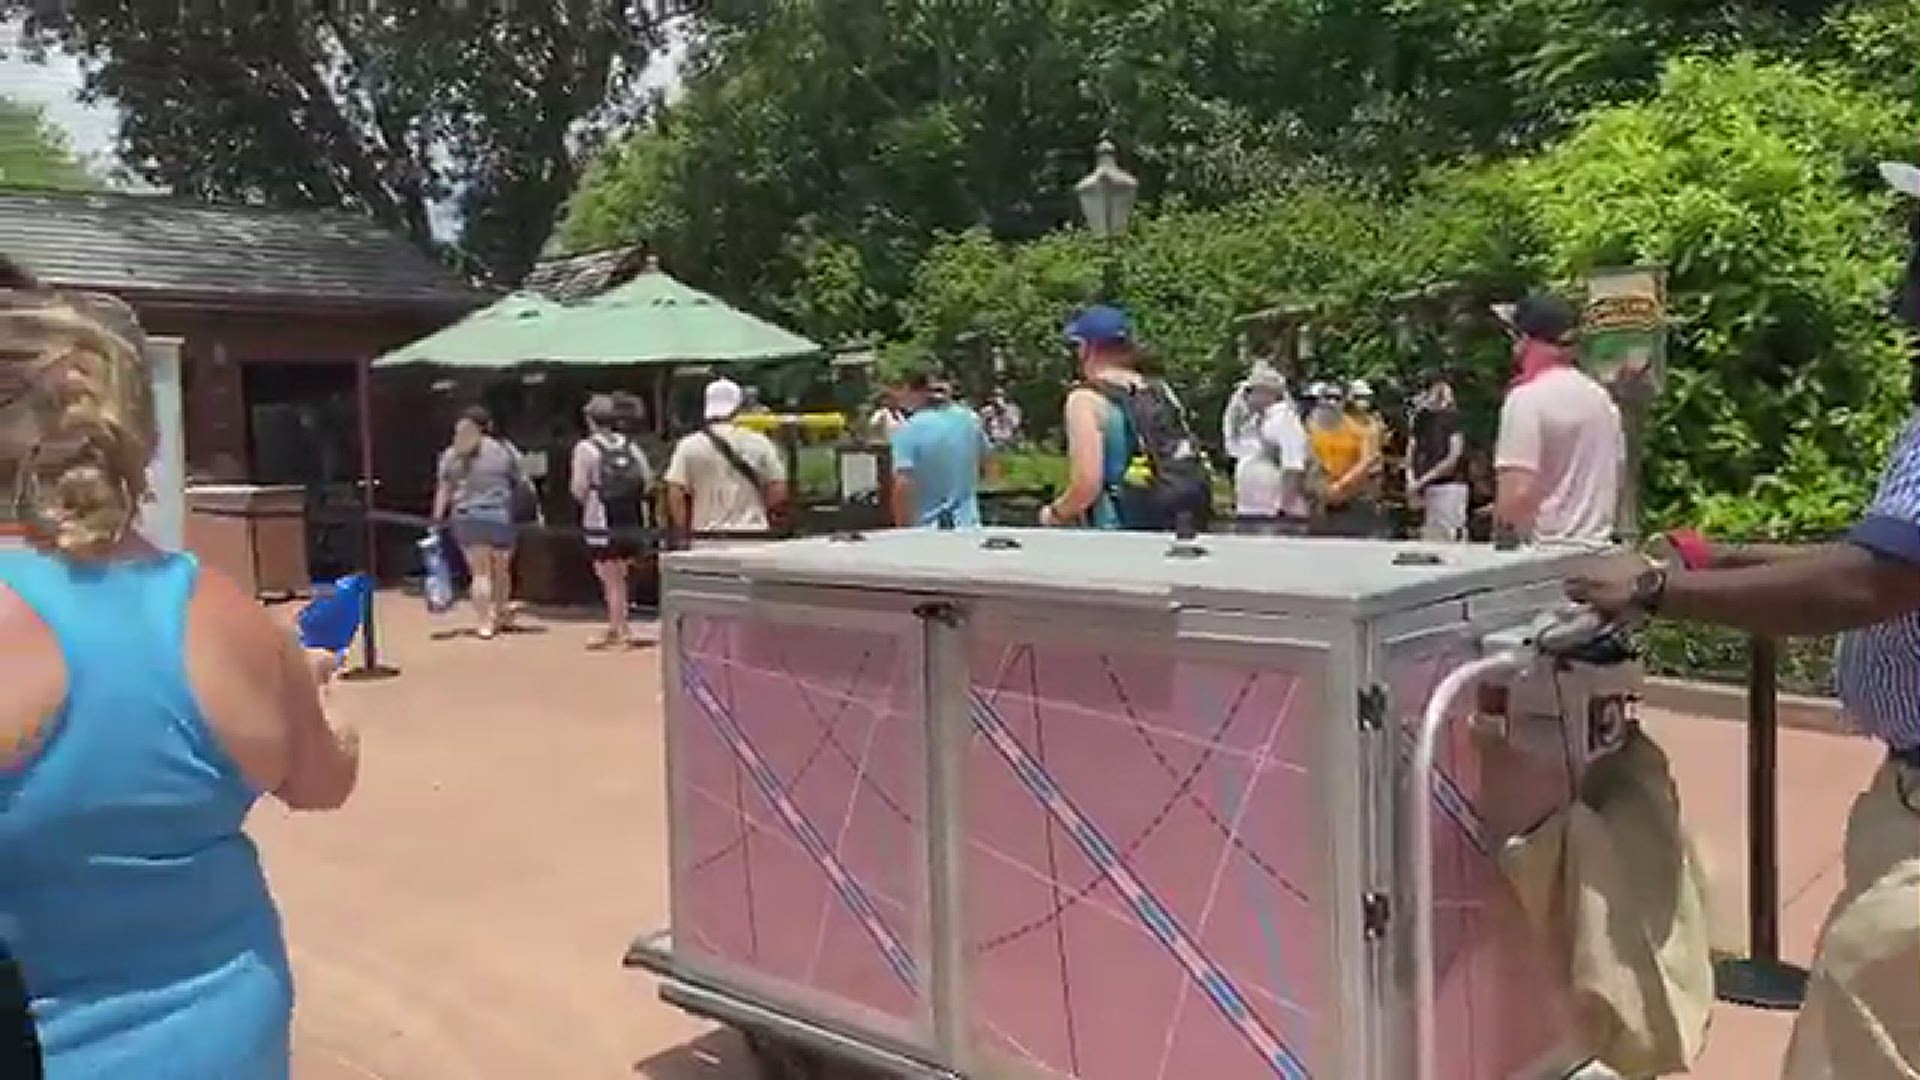 The Epcot Food and Wine Festival began Wednesday, the first day the park reopened to the public after closing due to the COVID-19 pandemic.